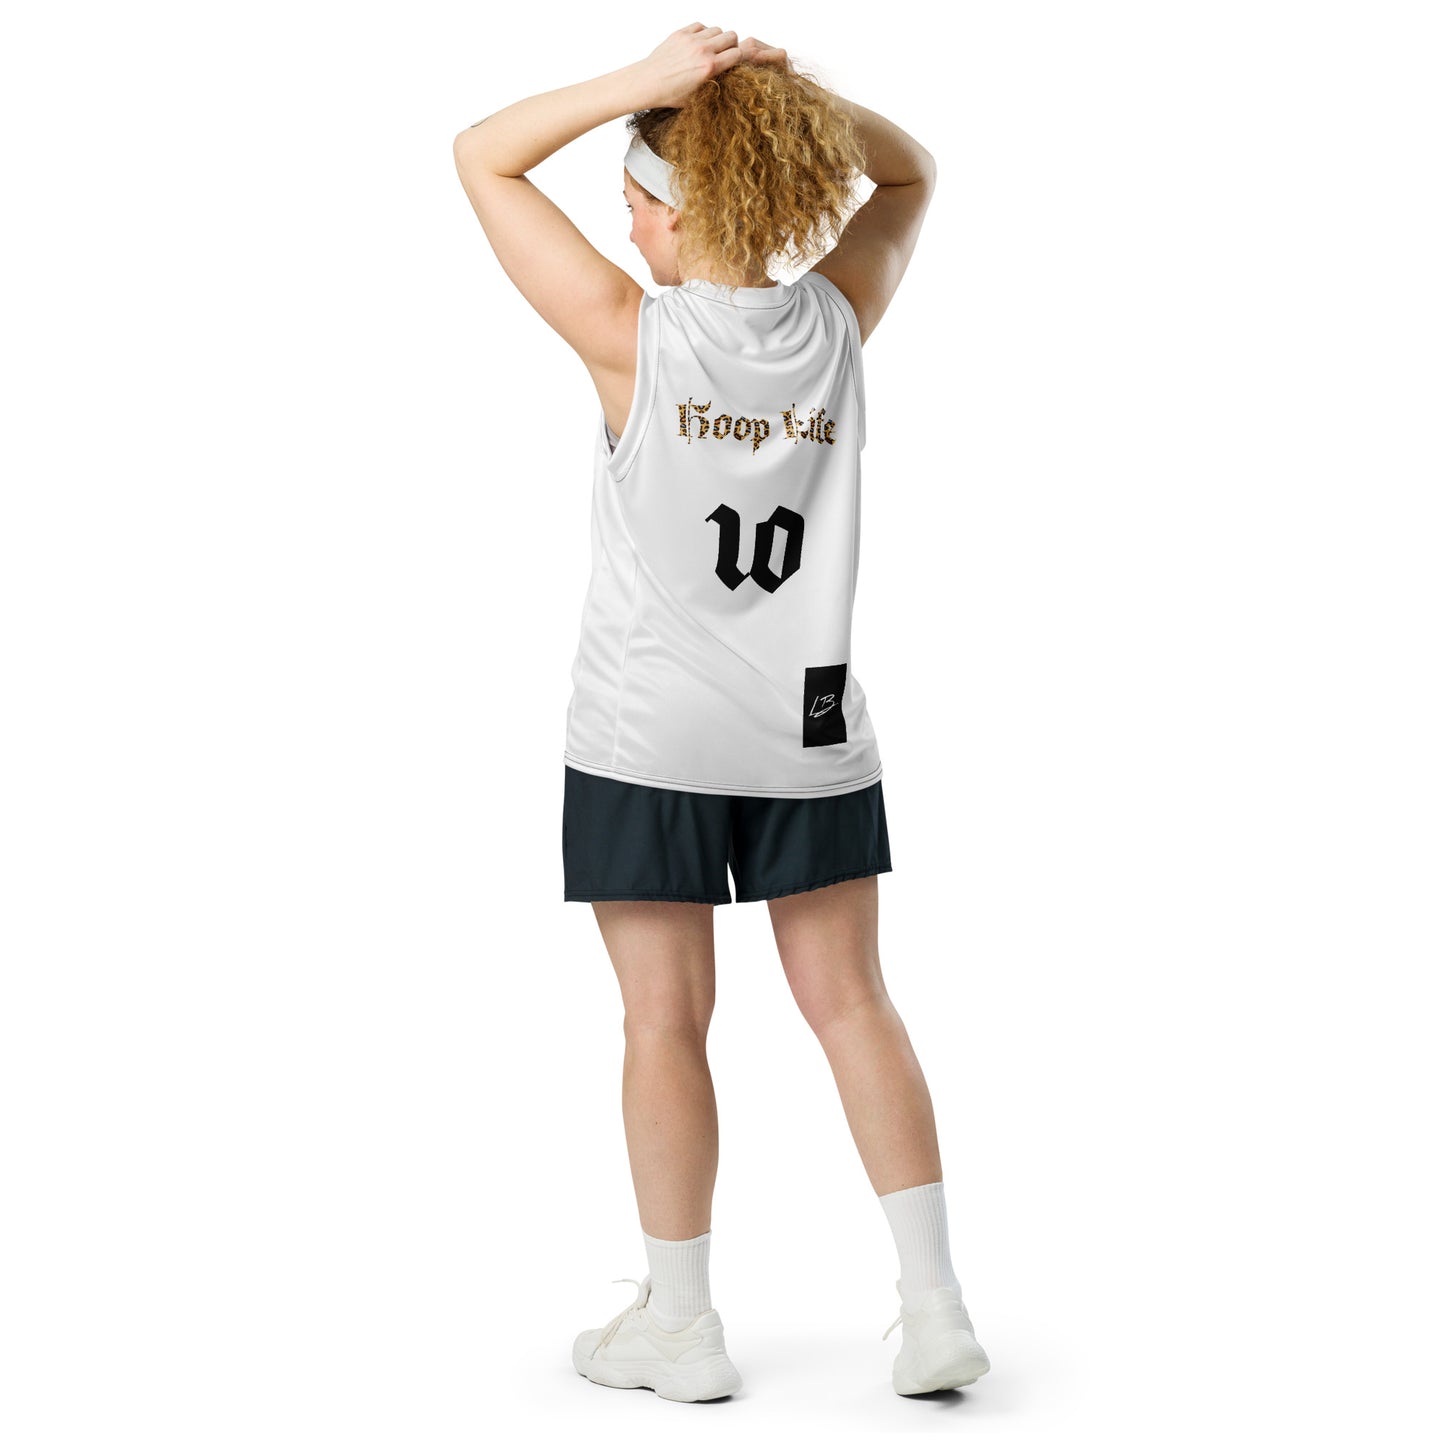 Recycled unisex basketball jersey